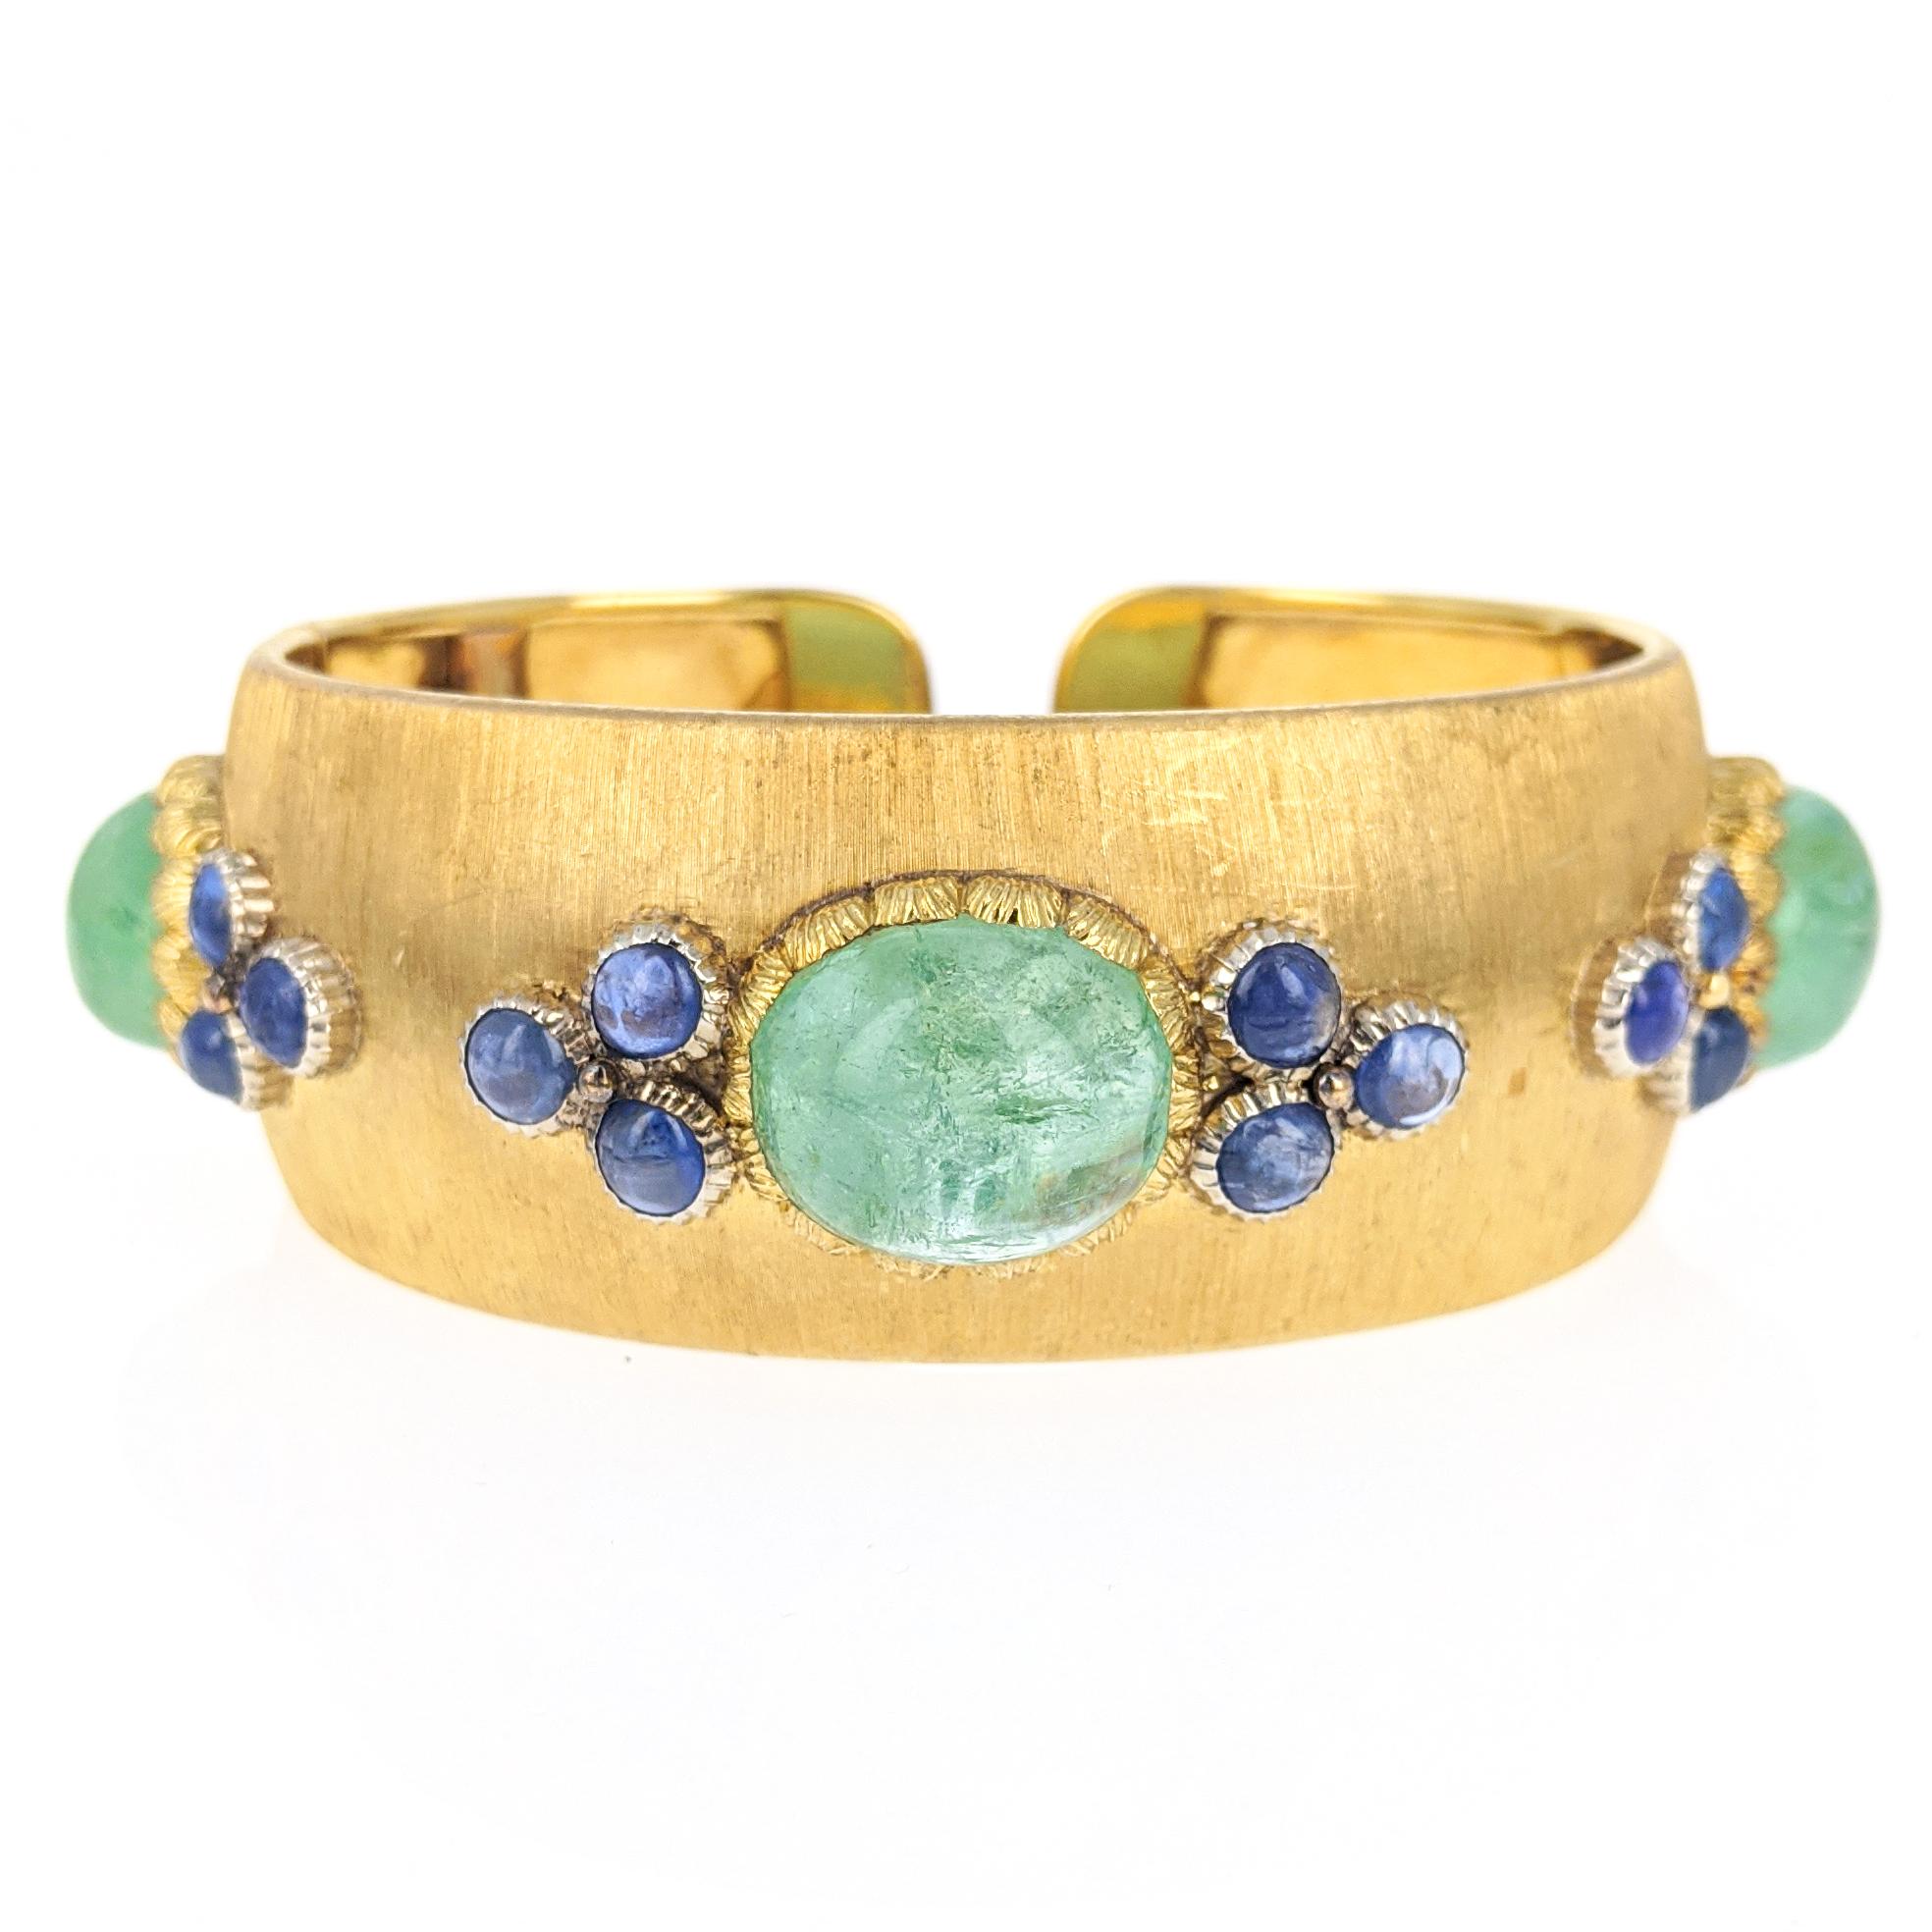 This Buccellati cuff bracelet features three cabochon emeralds, each flanked by trios of round cabochon sapphires. Mounted in 18 karat yellow gold with brushed finish. Signed Buccellati, with scratchmark and marked 750. Inner circumference measures